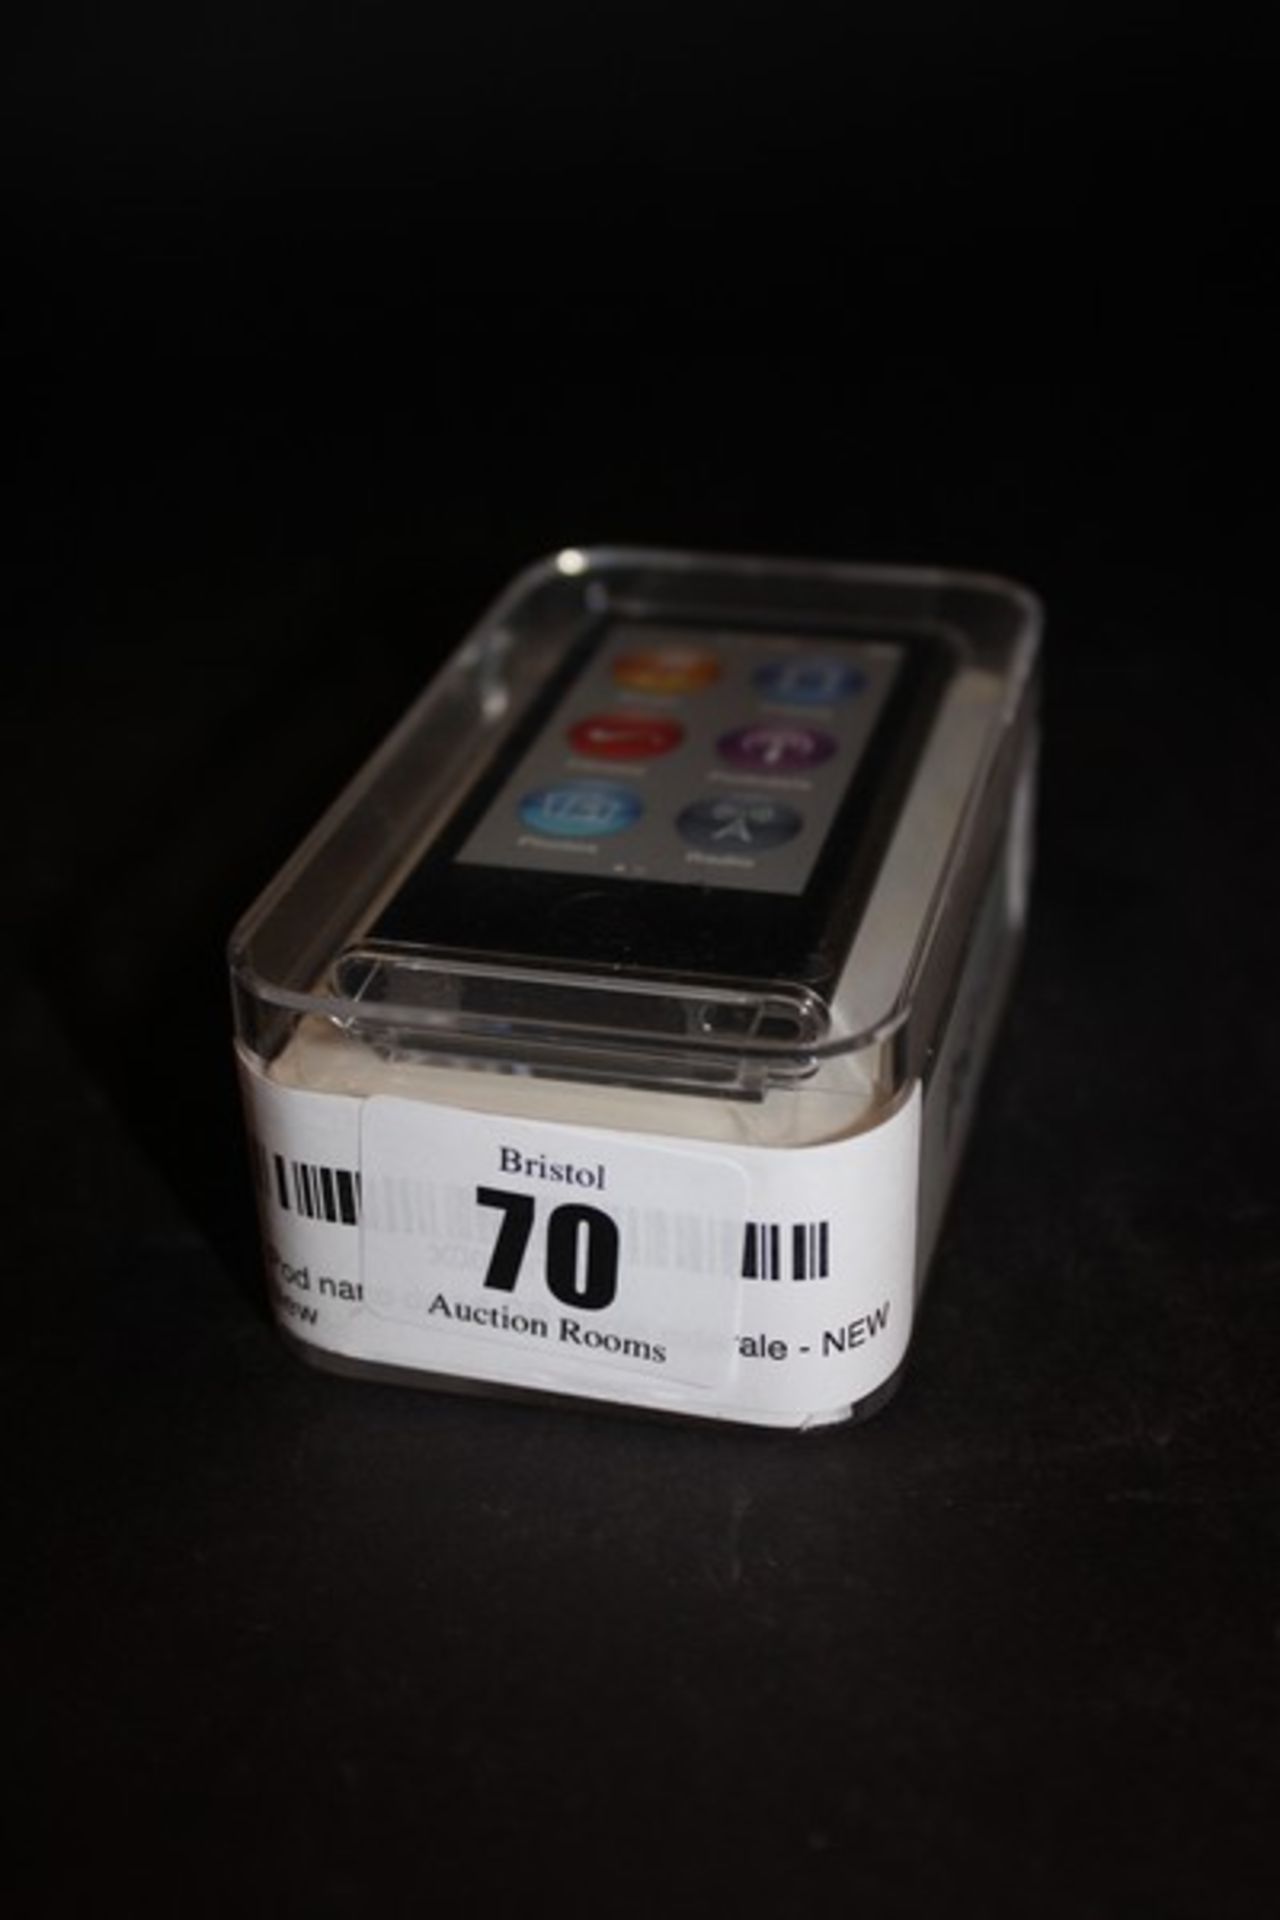 A space gray iPod Nano 16GB 7th Generation (Boxed as new).